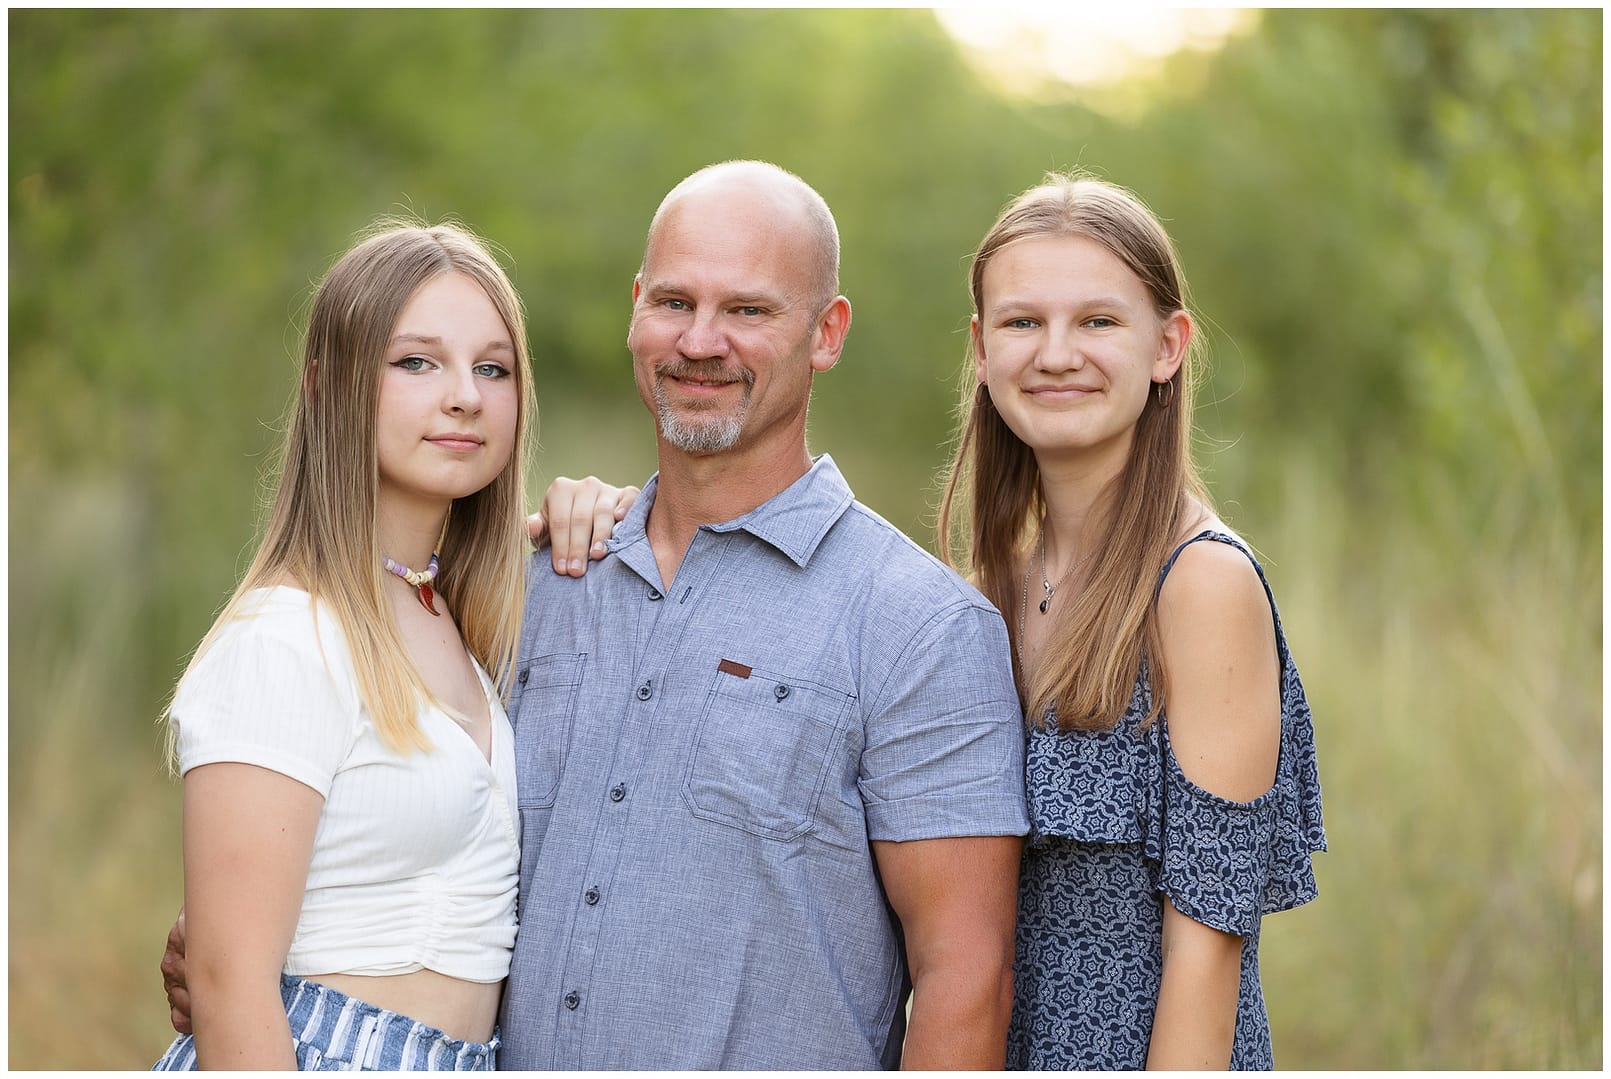 Dad and his two daughters. Photo by Tiffany Hix Photography.